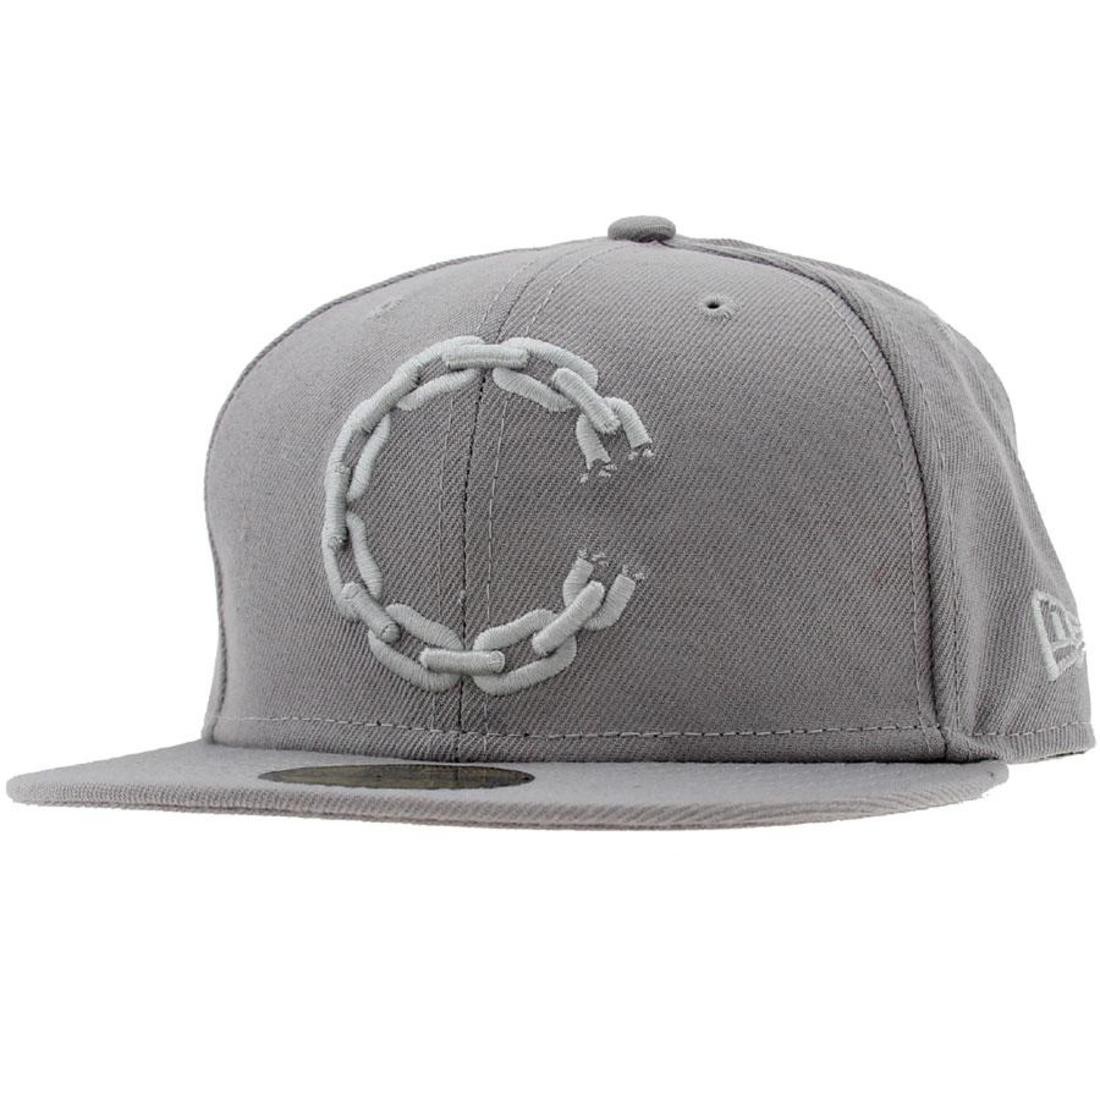 Crooks and Castles C Link Logo New Era Fitted Cap (grey)